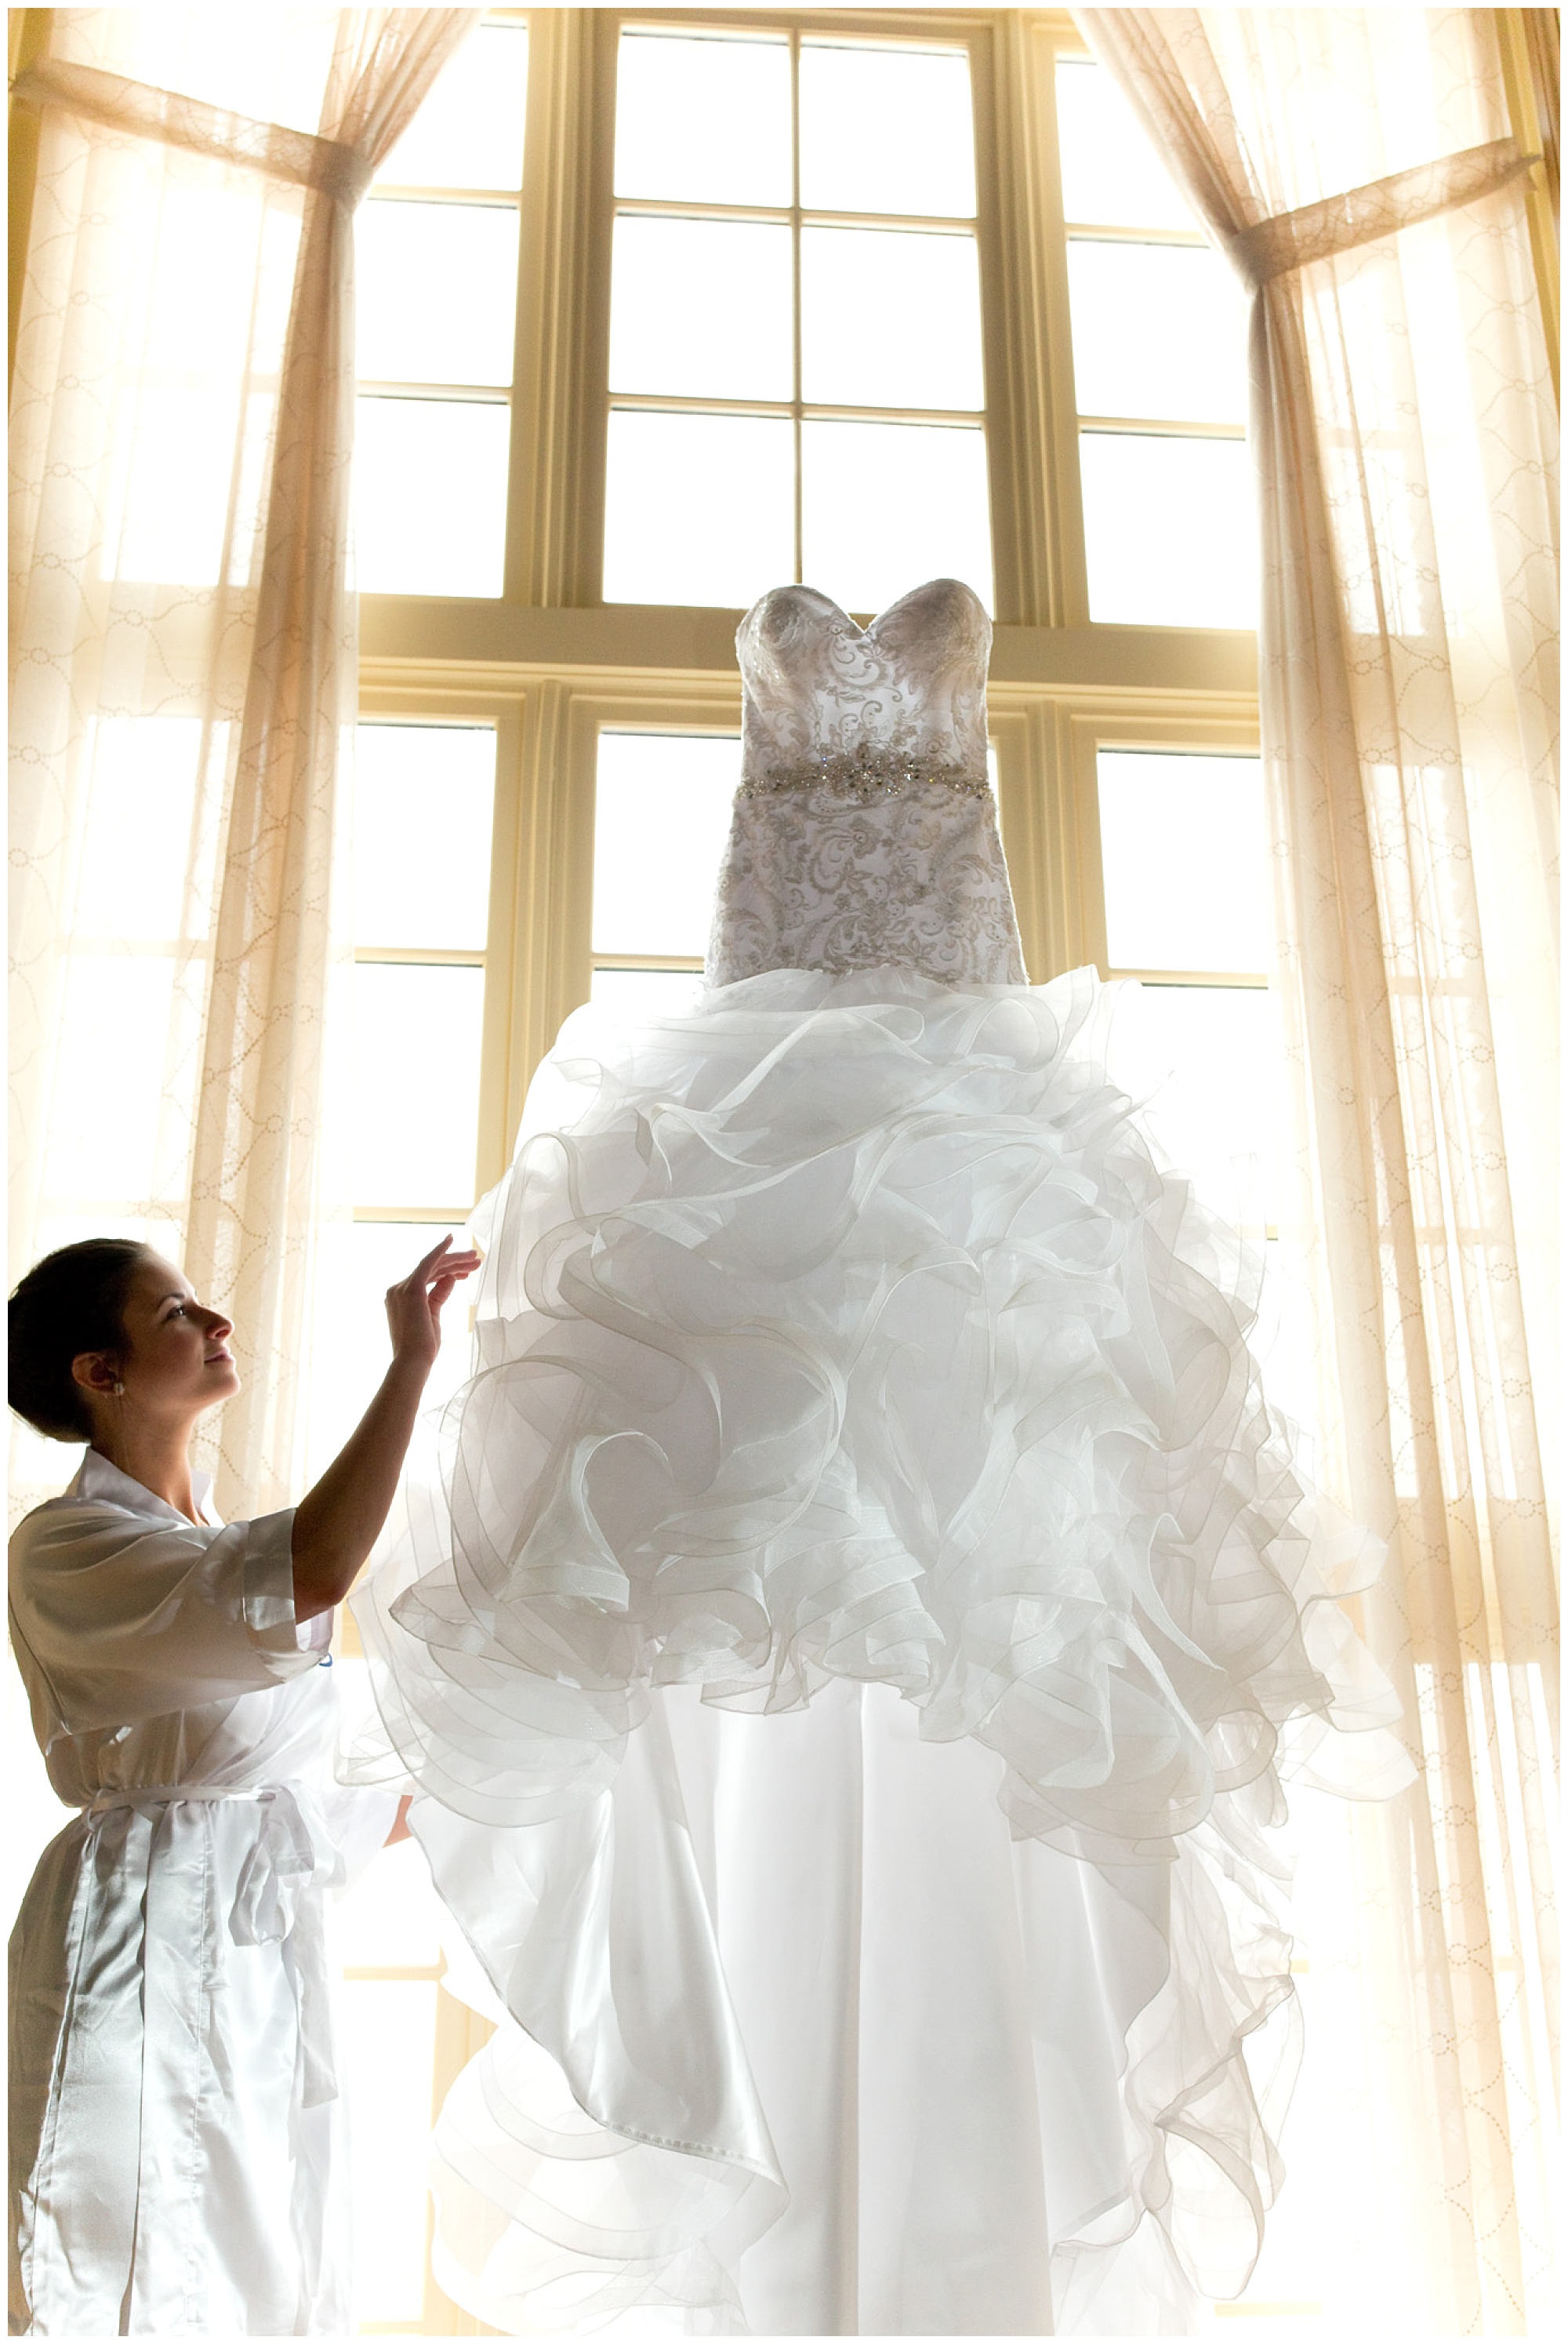 Photo of a bride admiring her dress which is suspended and backlited by a large window.